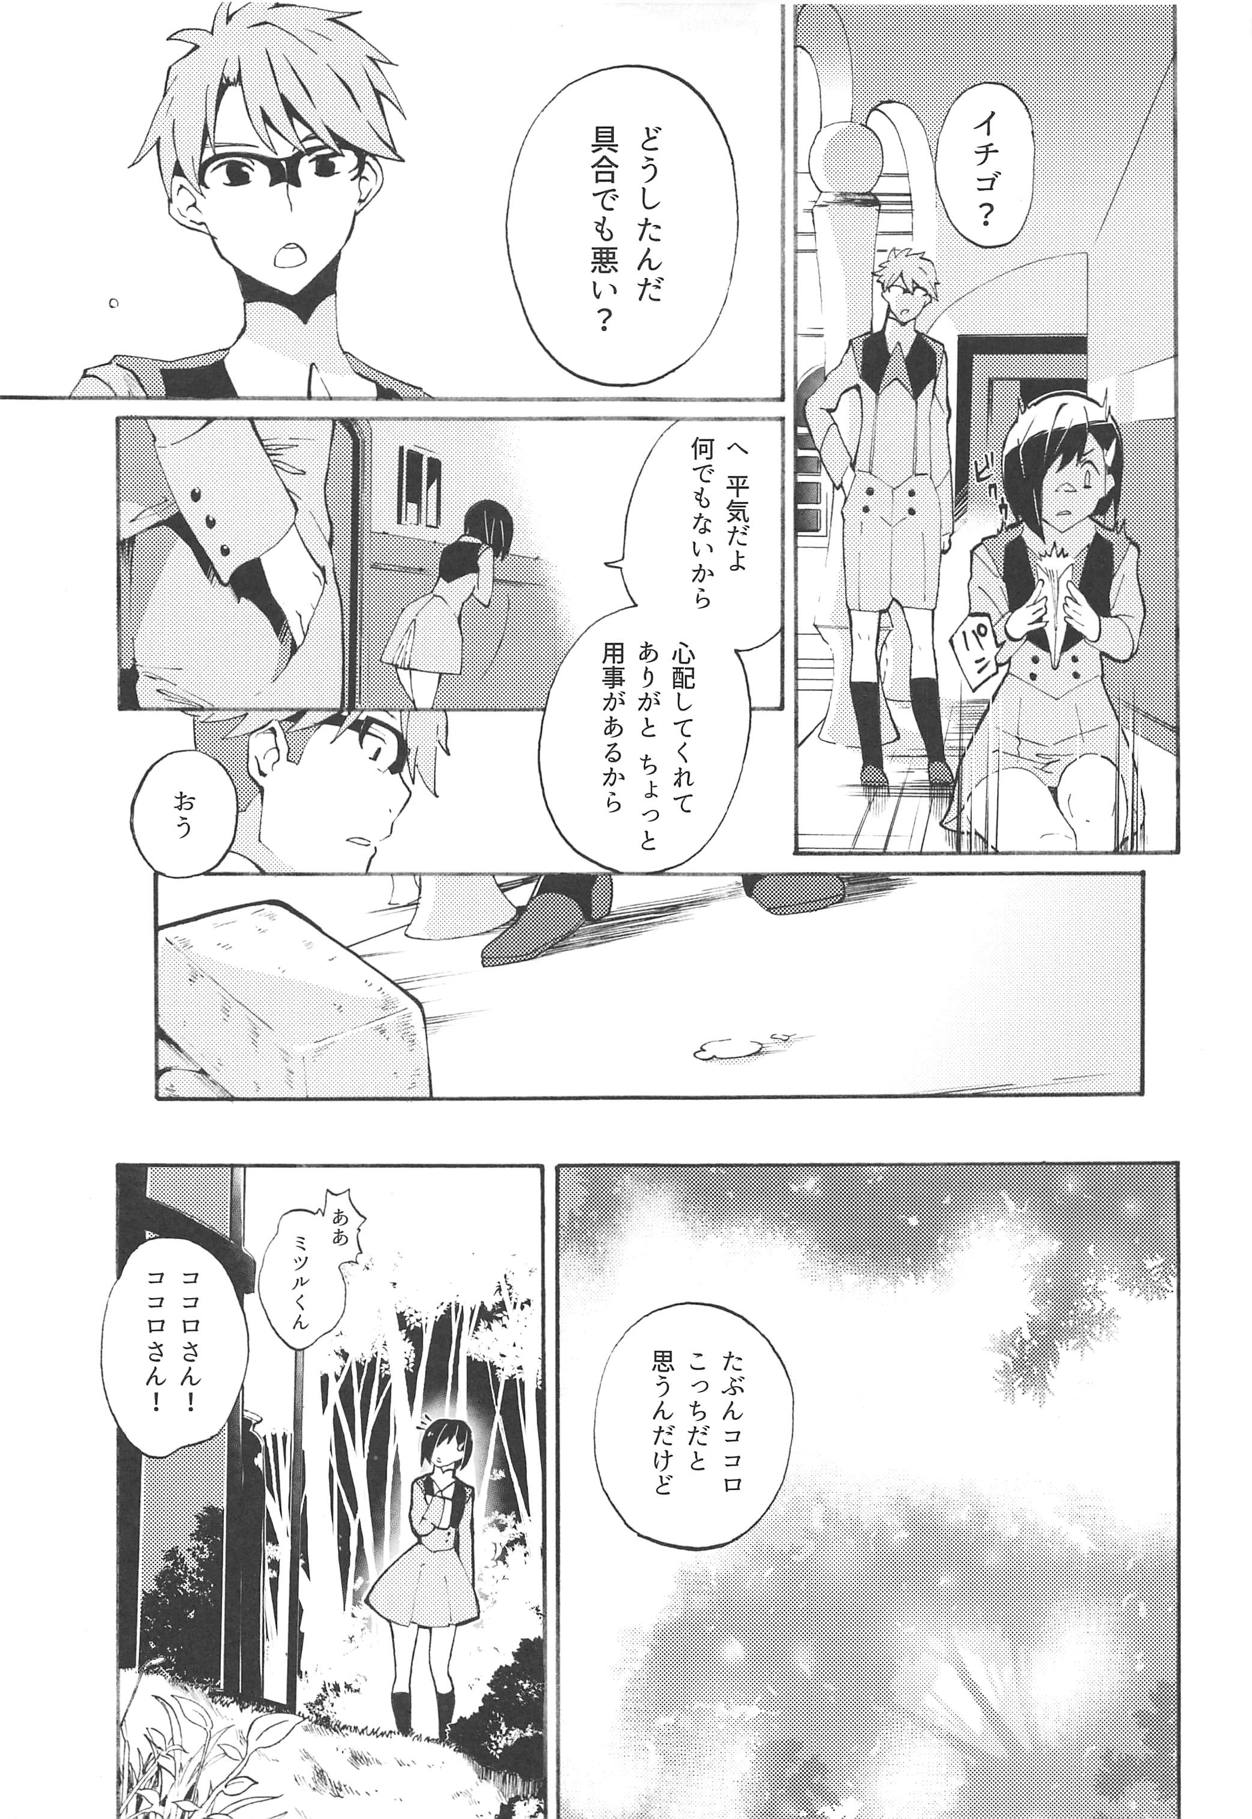 (CT33) [Sagano Line (Bittsu, Max)] KISS OF EROS (DARLING in the FRANXX) page 14 full